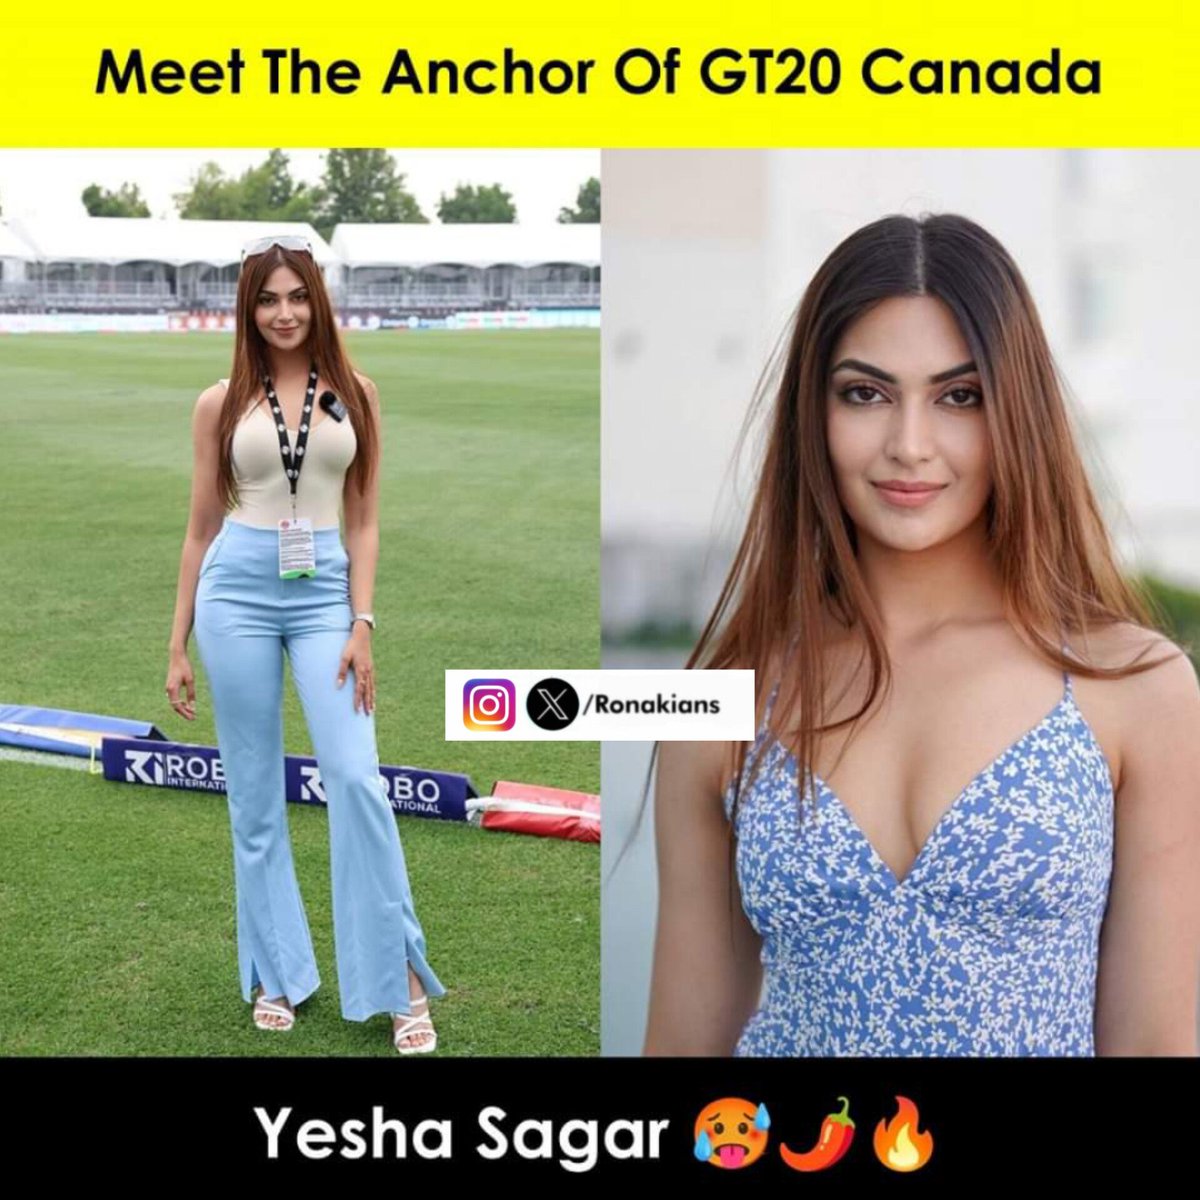 The Time To Watch GT20 Canada 🤣

#YeshaSagar #GT20Canada